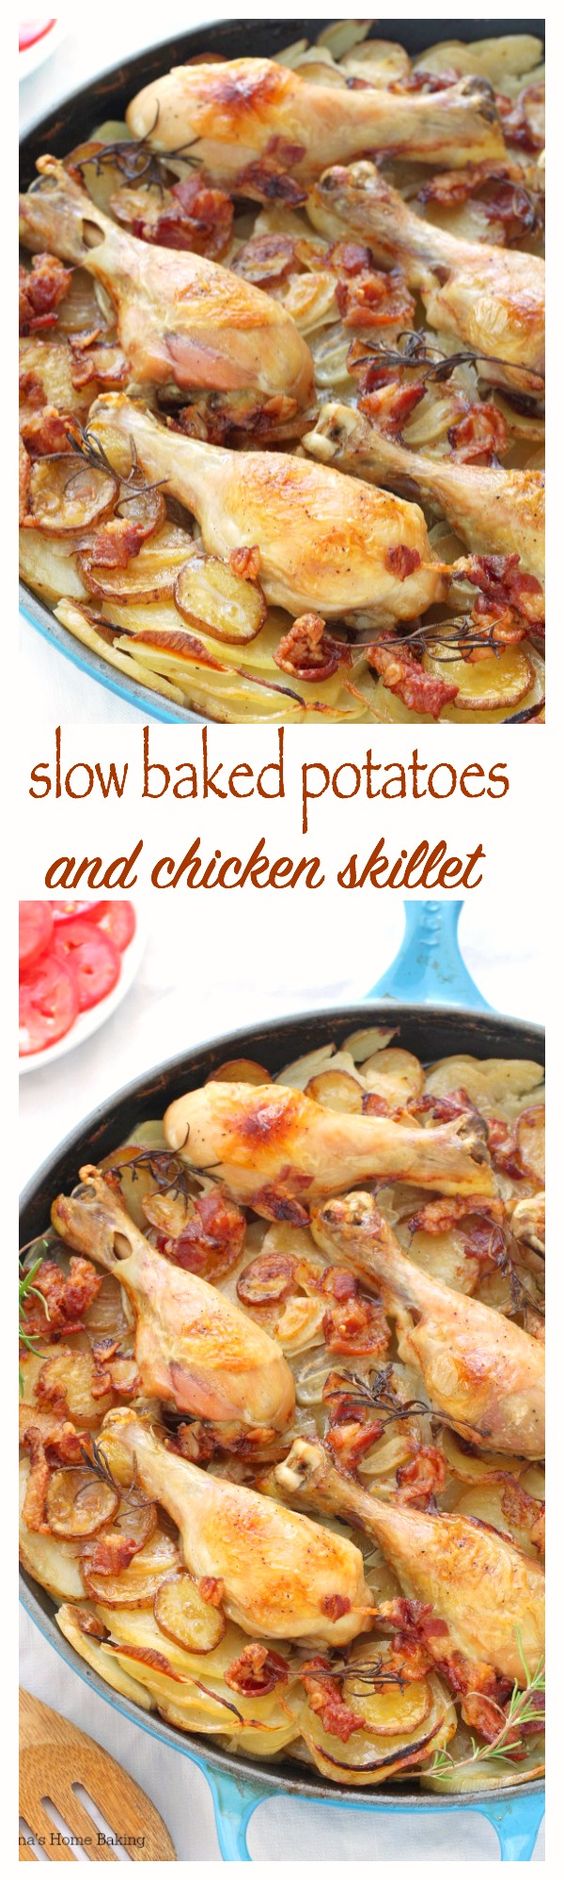 Tender chicken drumsticks cooked on top of layers of thin sliced potatoes and onions make this potatoes and chicken skillet an mouthwatering, flavorful meal.